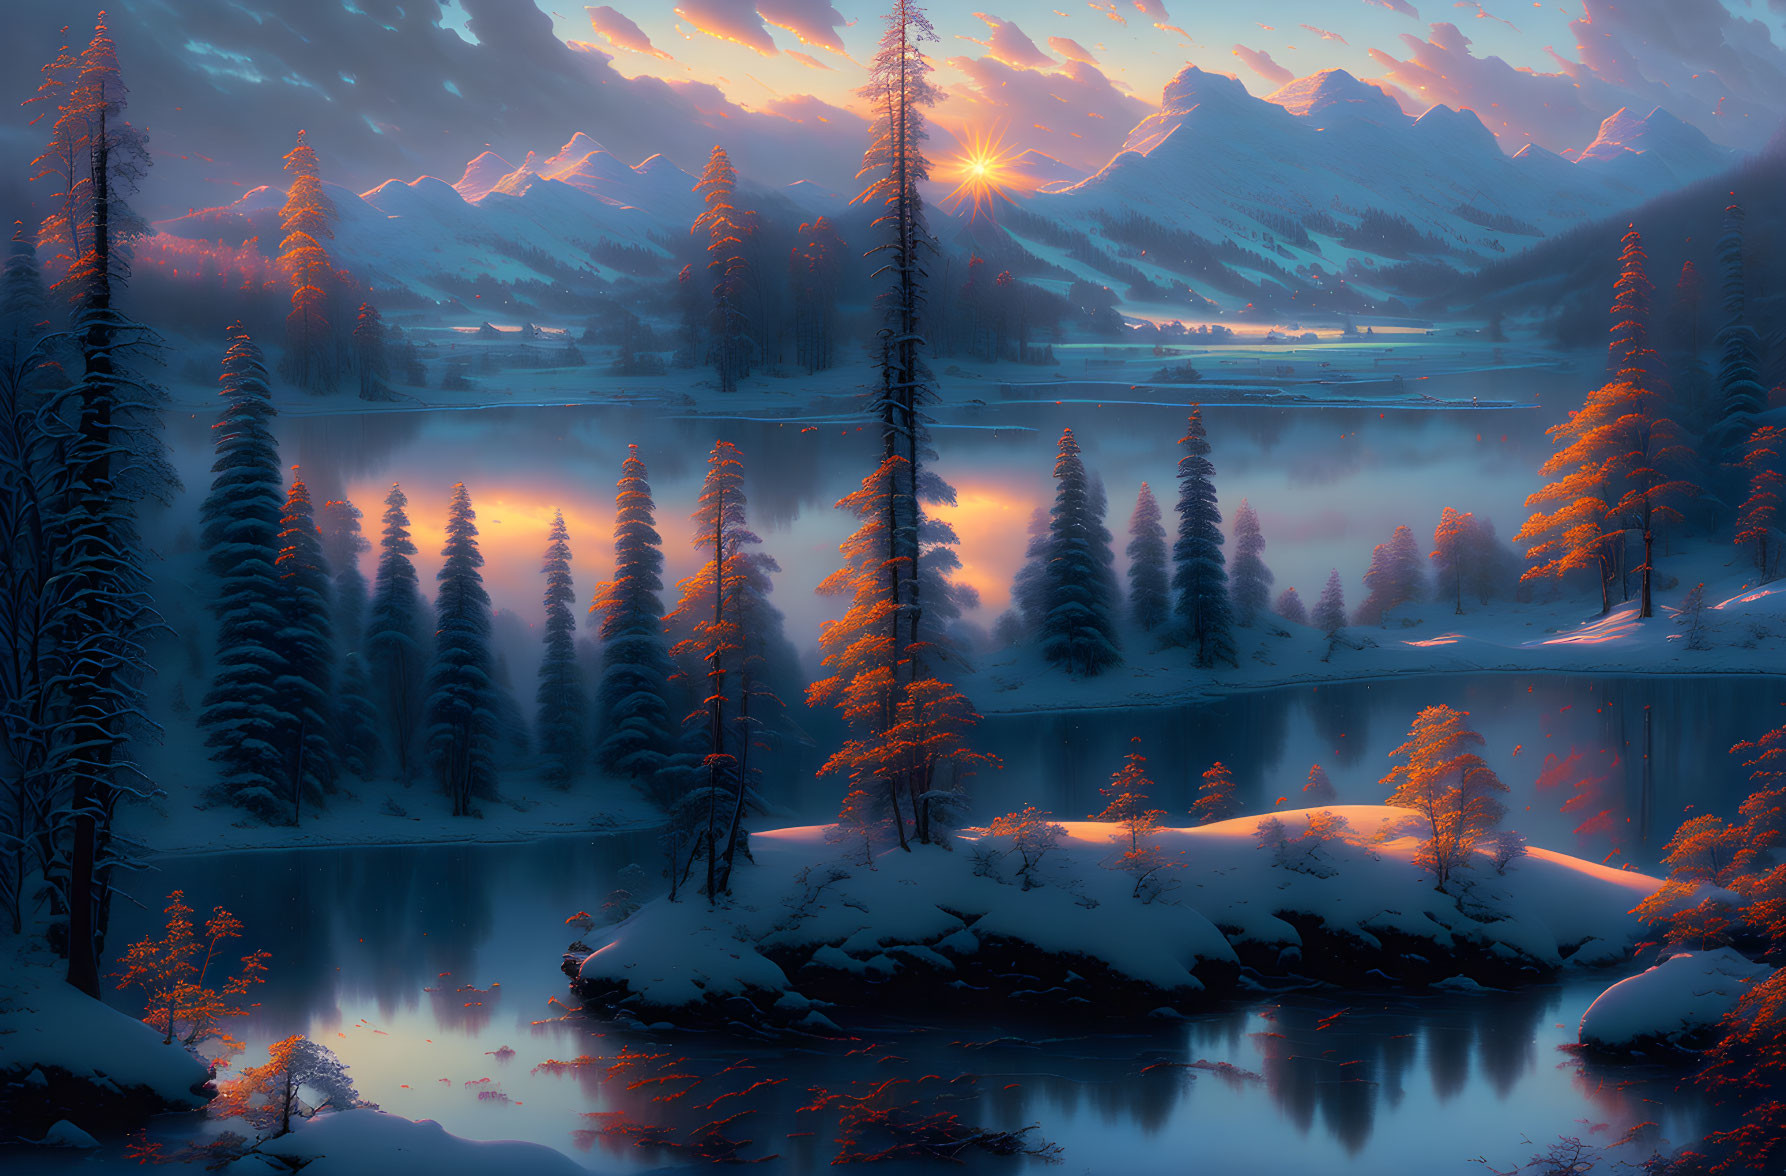 Snow-covered trees, serene lake, sunset behind mountains: Tranquil winter scene